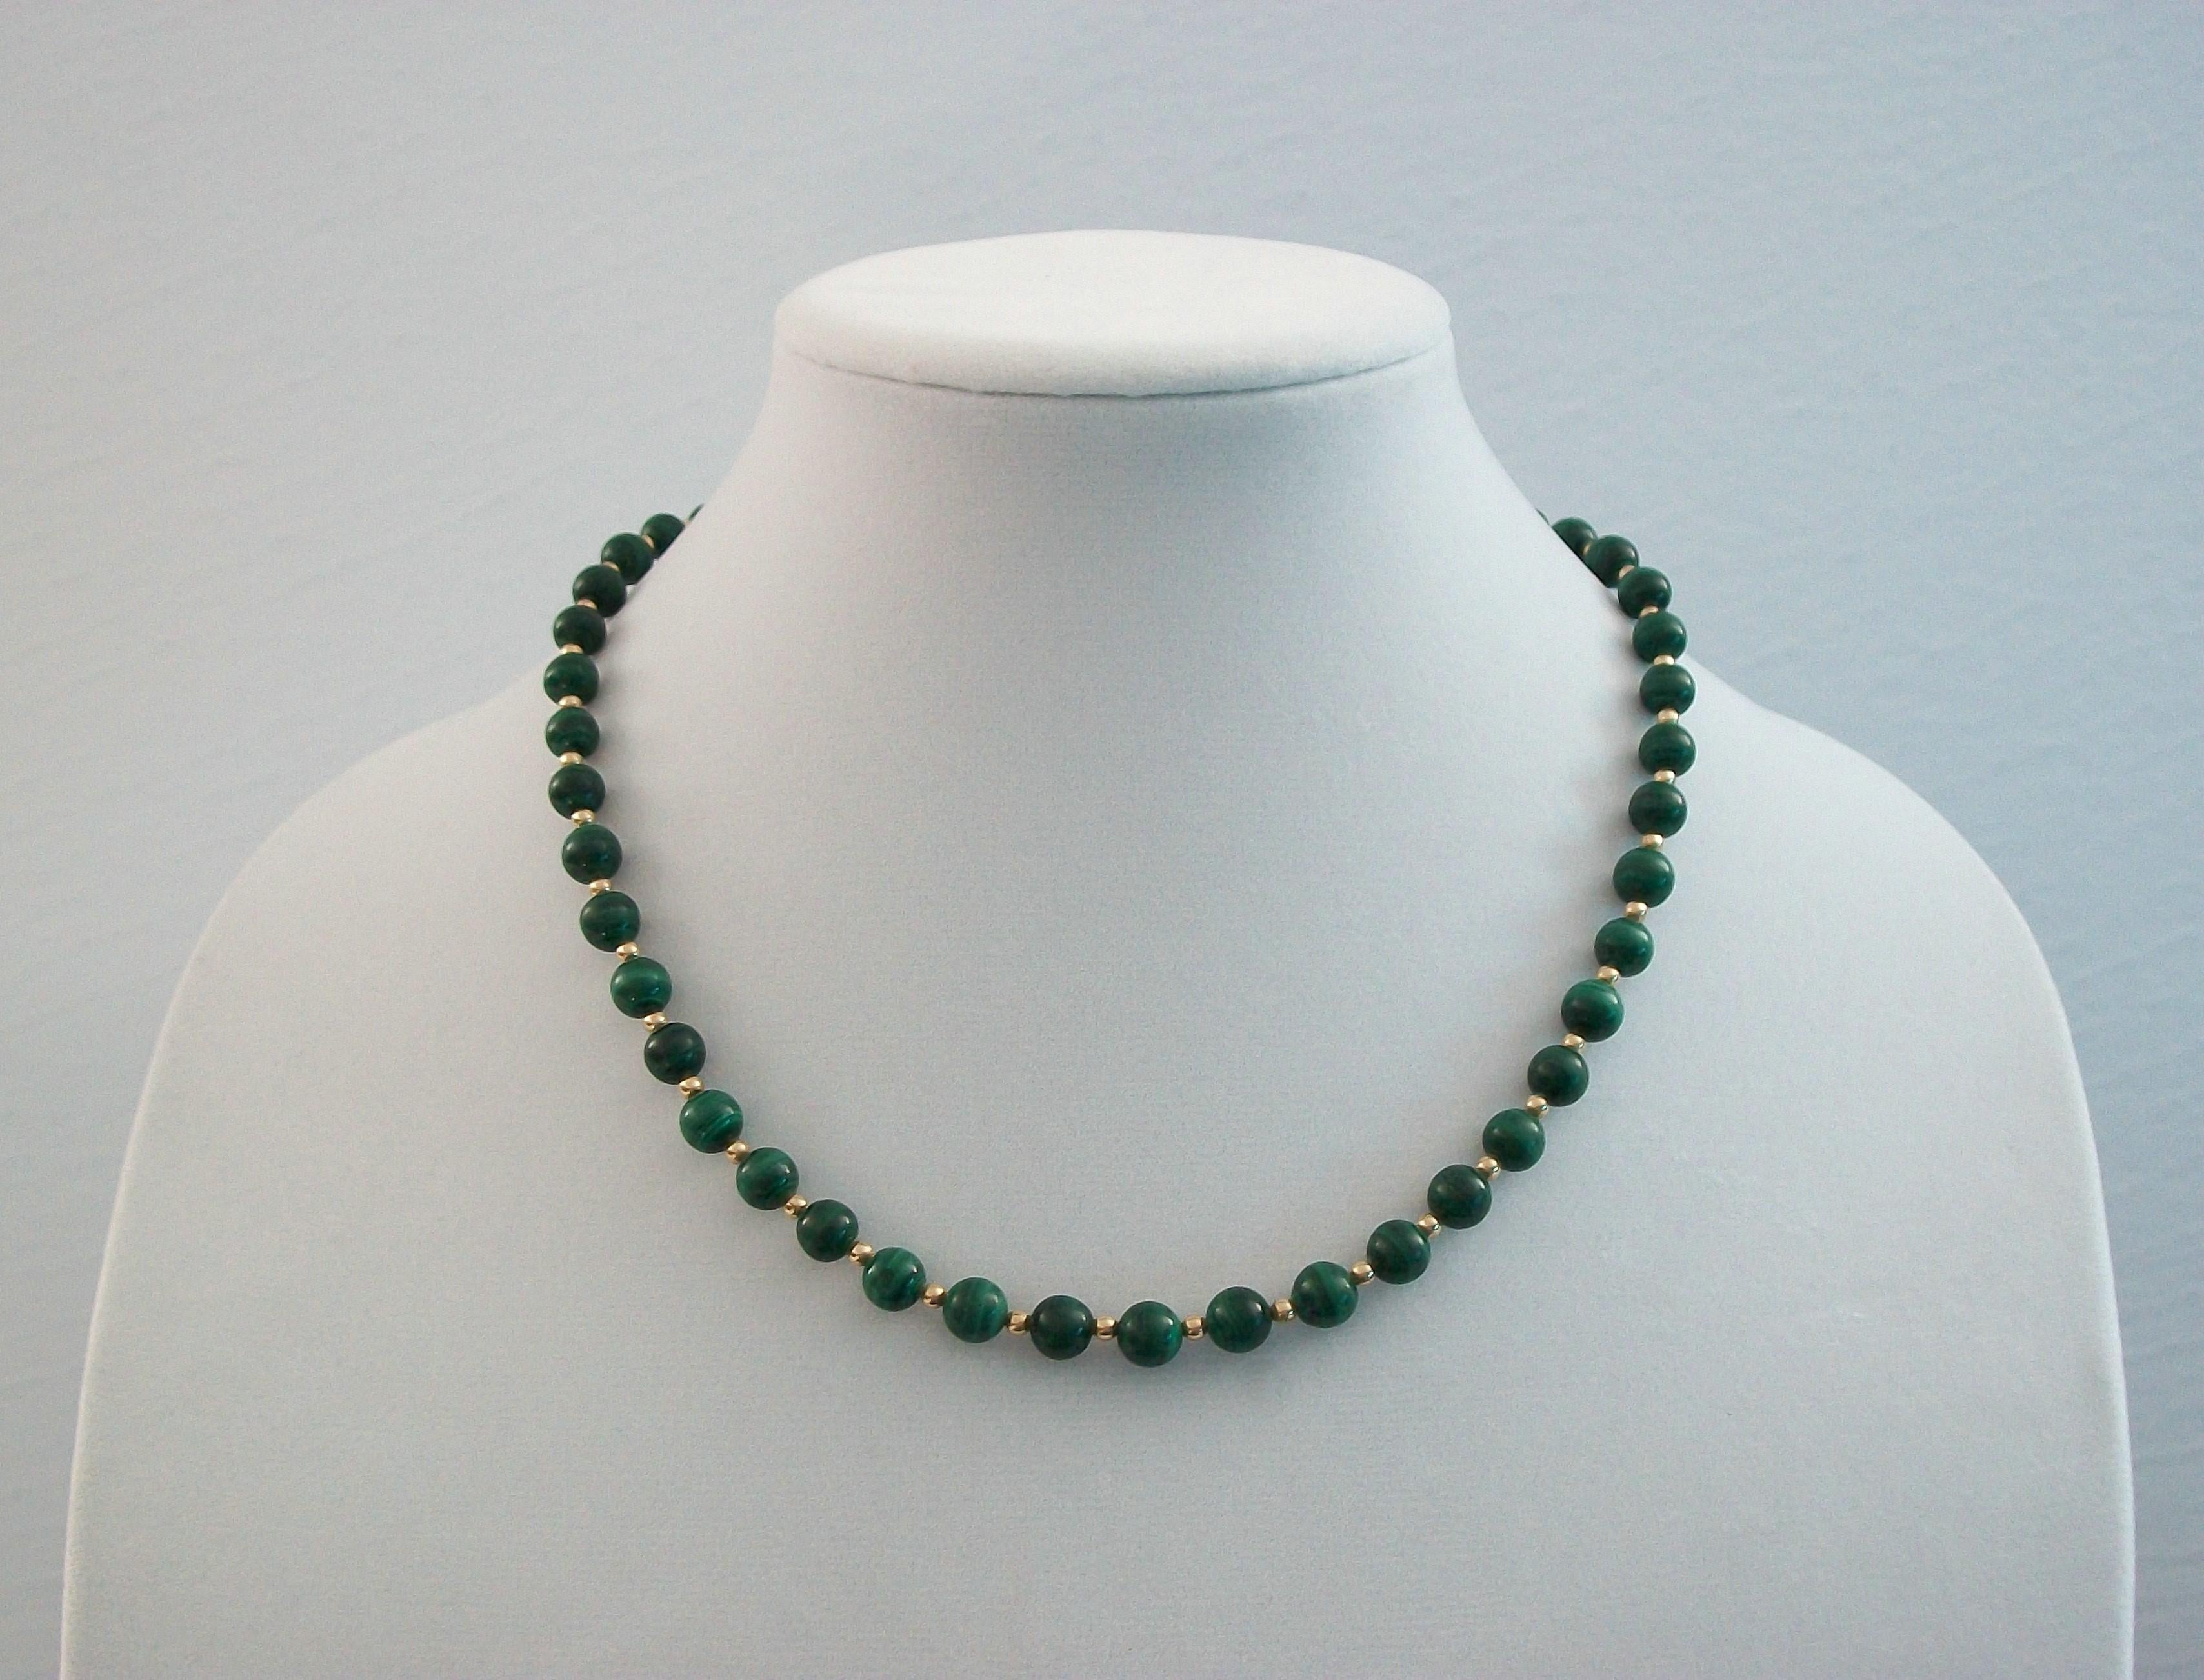 Contemporary Vintage Malachite & 14K Gold Beaded Necklace - France - Late 20th Century For Sale